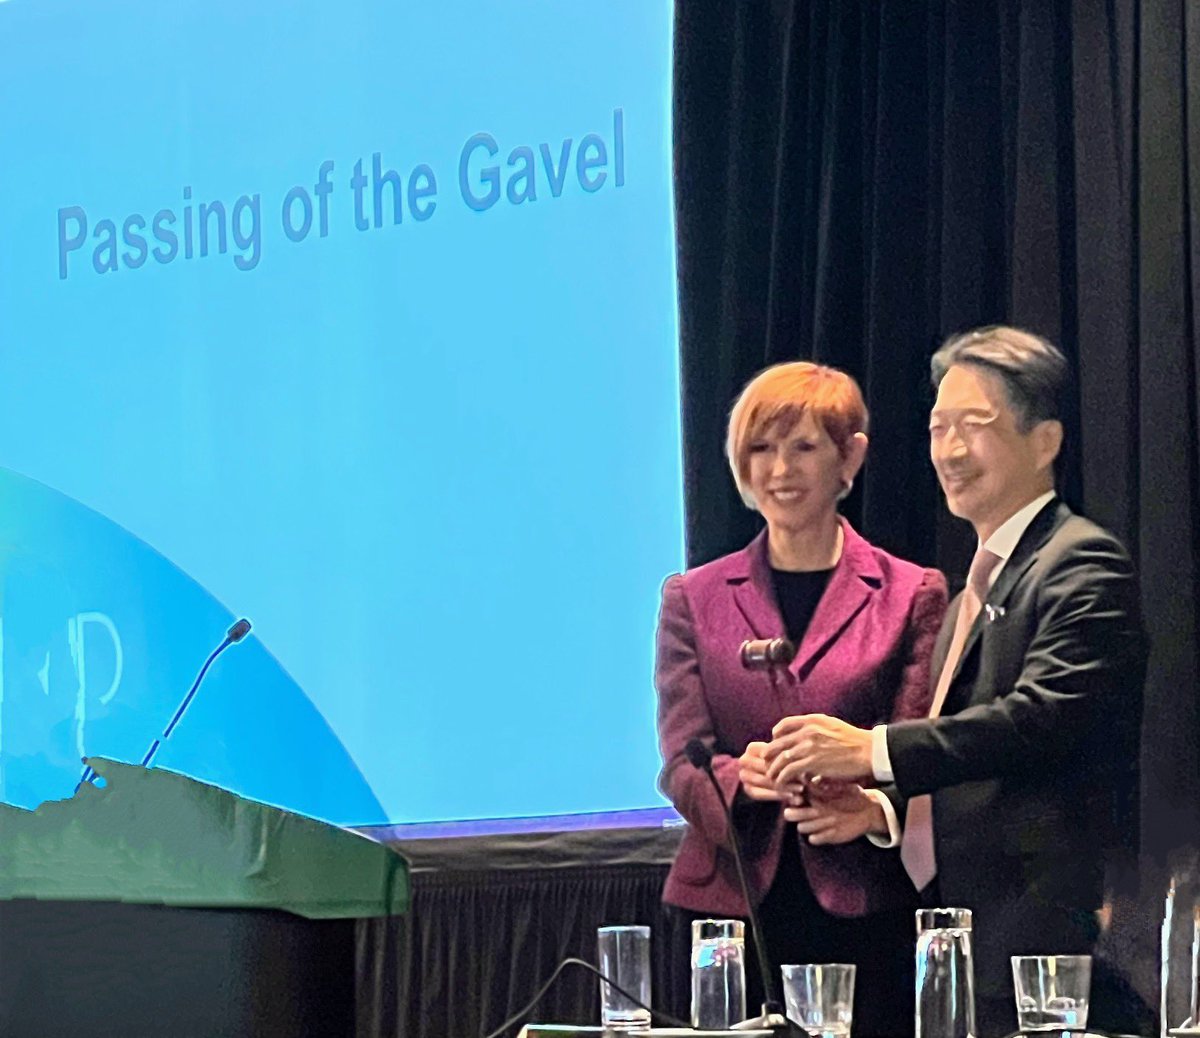 Join us to congratulate our division Chief Dr. Kim as he takes on the gavel as the President Elect of the AASLD! The current @AASLDPresident passing the gavel to @WRayKimMD! @AASLDtweets